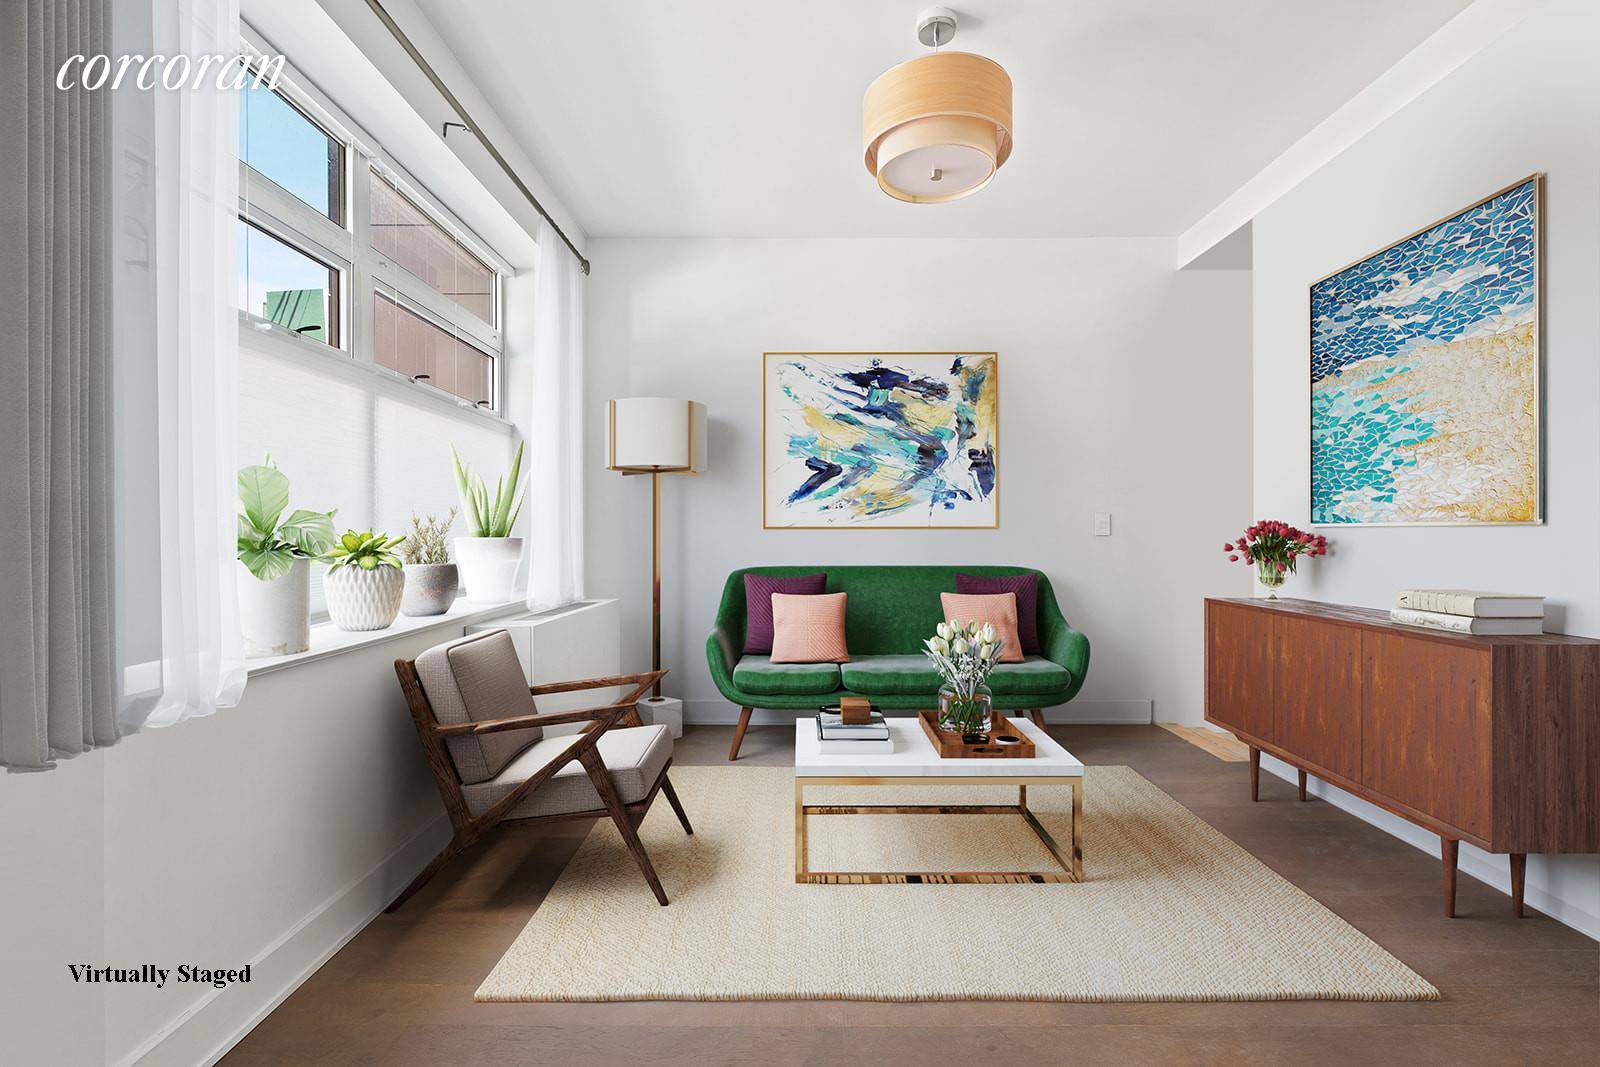 Just a few blocks from both McCarren and McGolrick Park in Williamsburg, this spacious studio duplex with finished basement provides a versatile layout with modern finishes and customized upgrades.